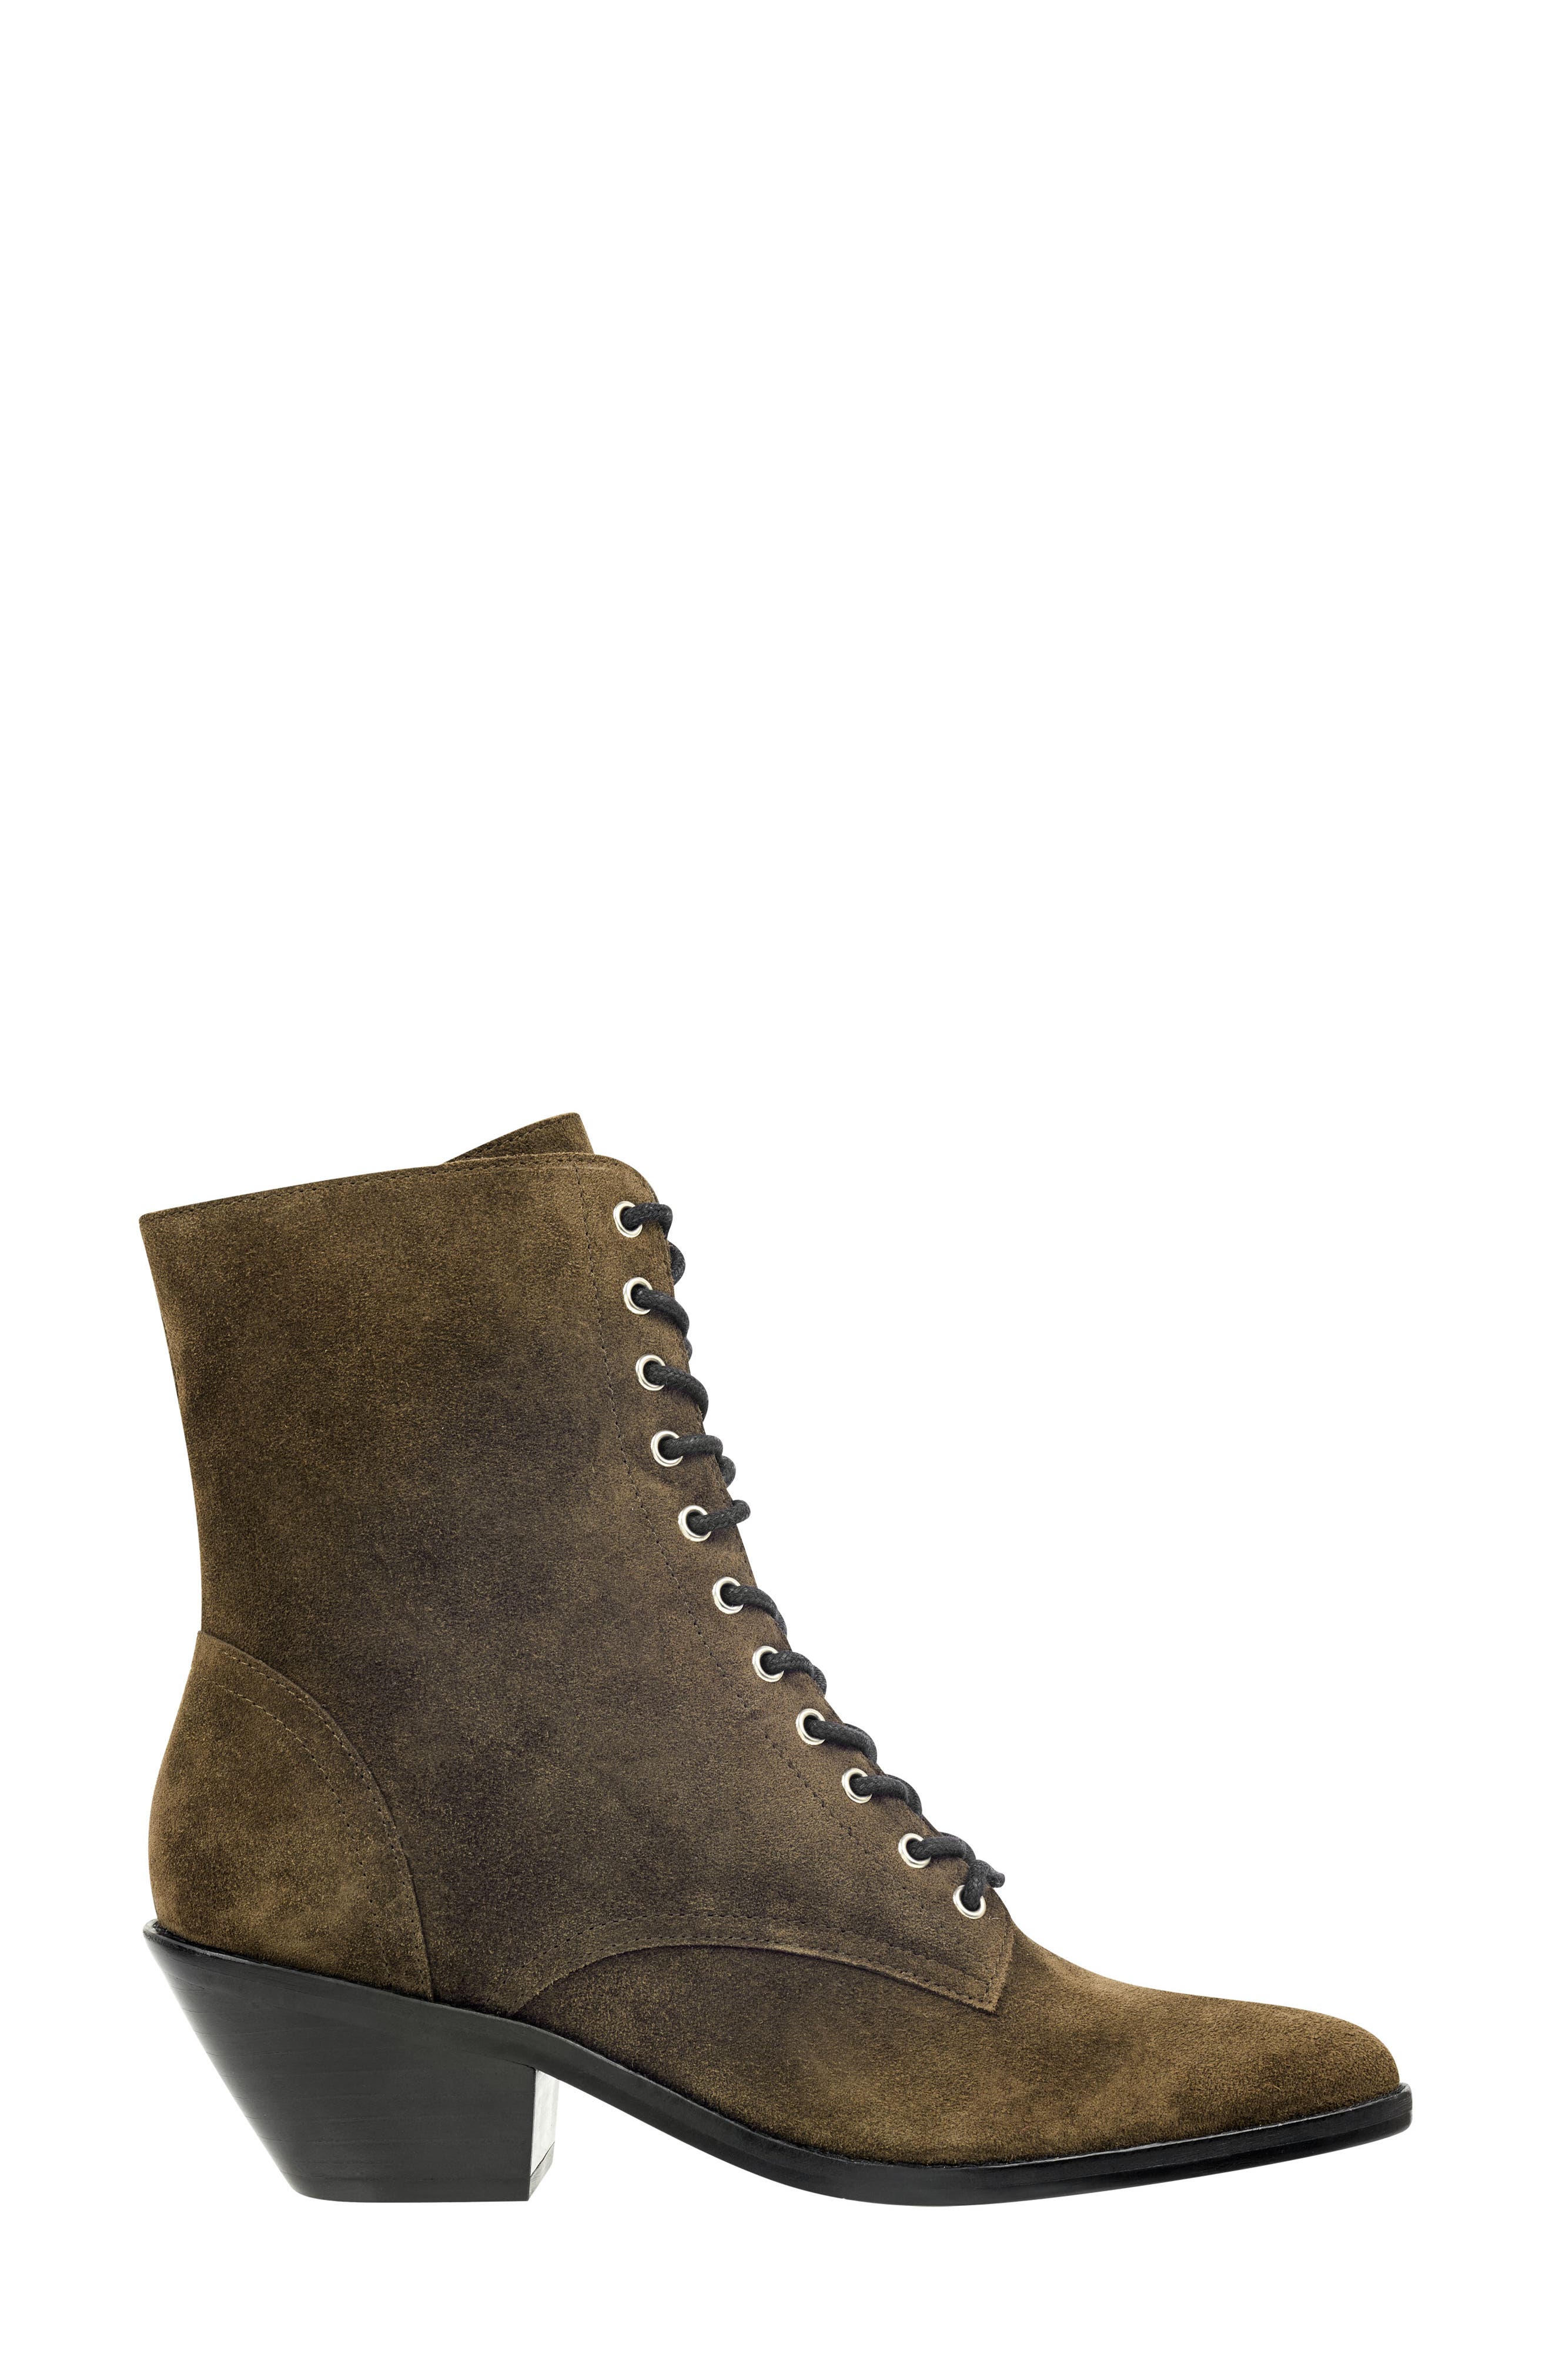 marc fisher bowie boot